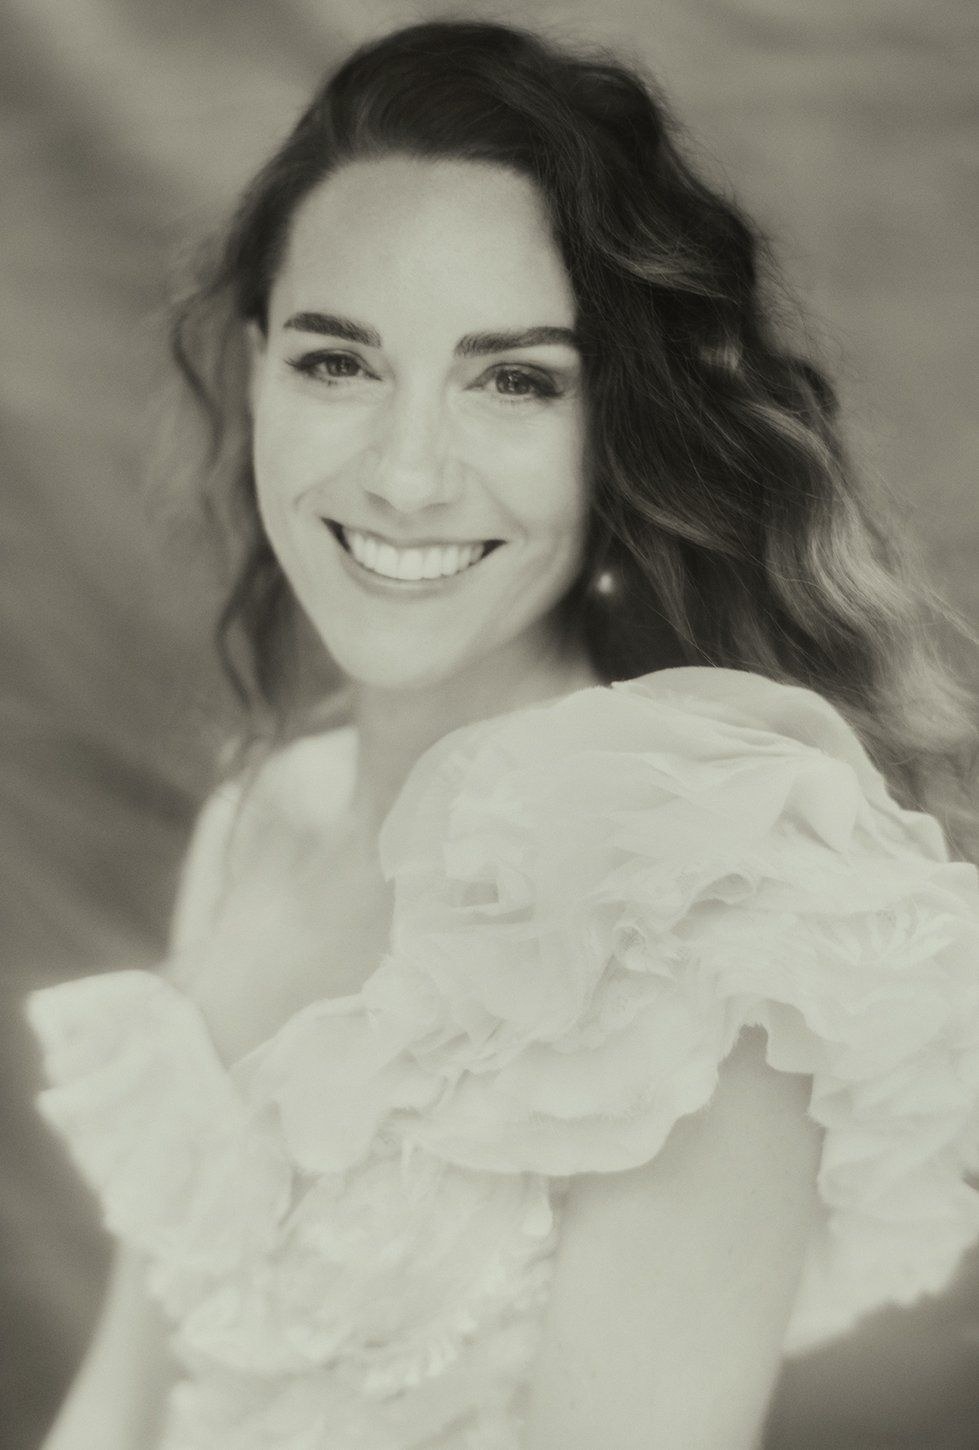 Kate smiles at the camera in a soft, black-and-white image